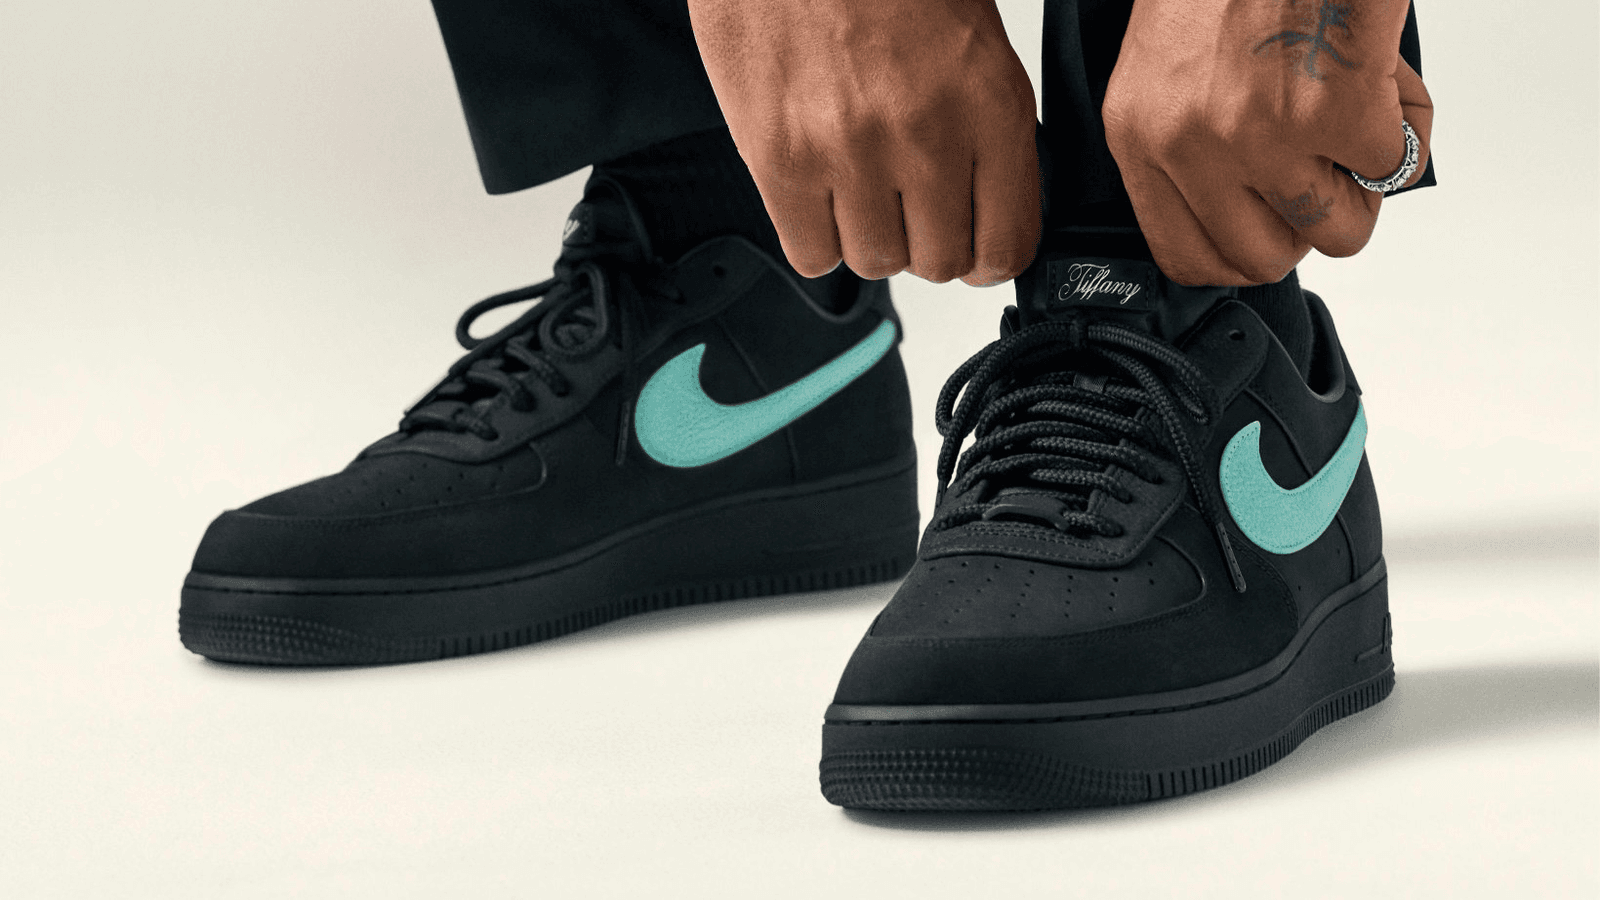 EARLY LOOK: Is the TIFFANY & CO x NIKE AIR FORCE 1 Worth $400